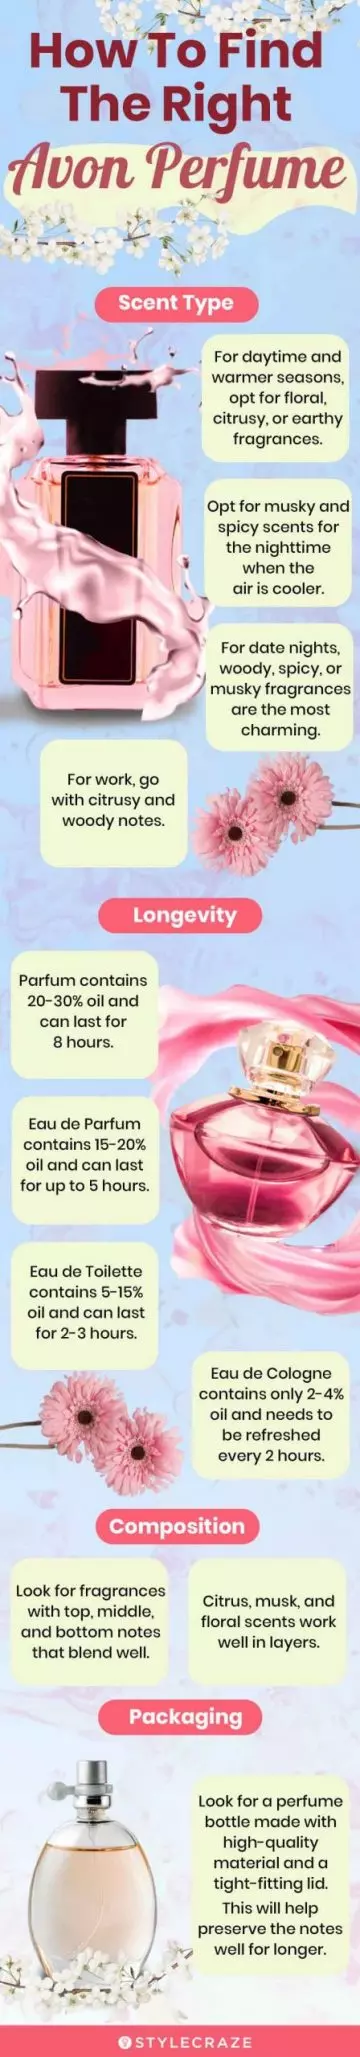 How To Find The Right Avon Perfume (infographic)